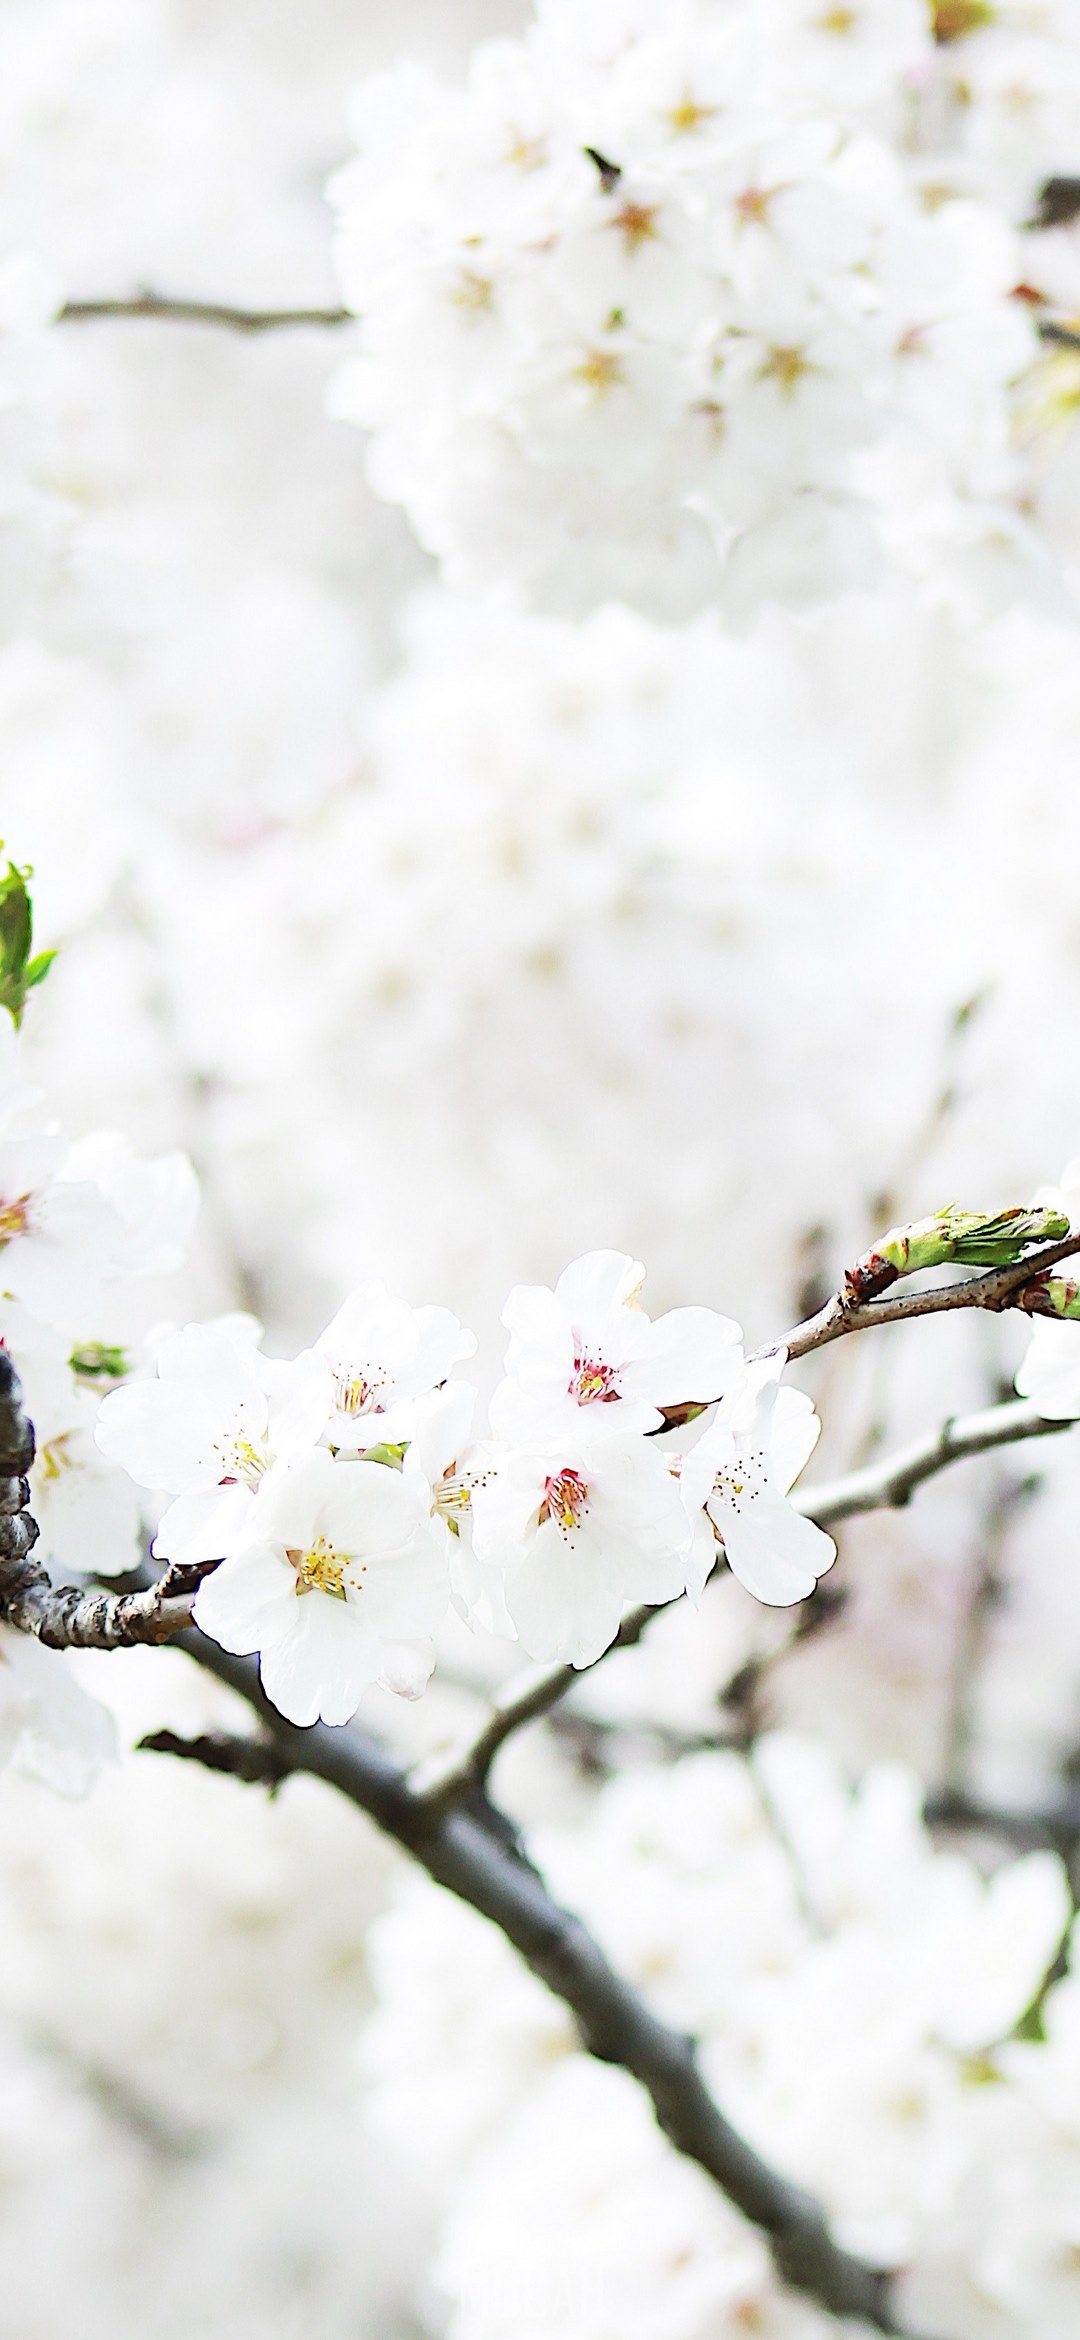 close up of cherry blossom branch in full bloom in spring high park, lost in white, vivo U3 wallpaper HD free download, 1080x2340 Gallery HD Wallpaper